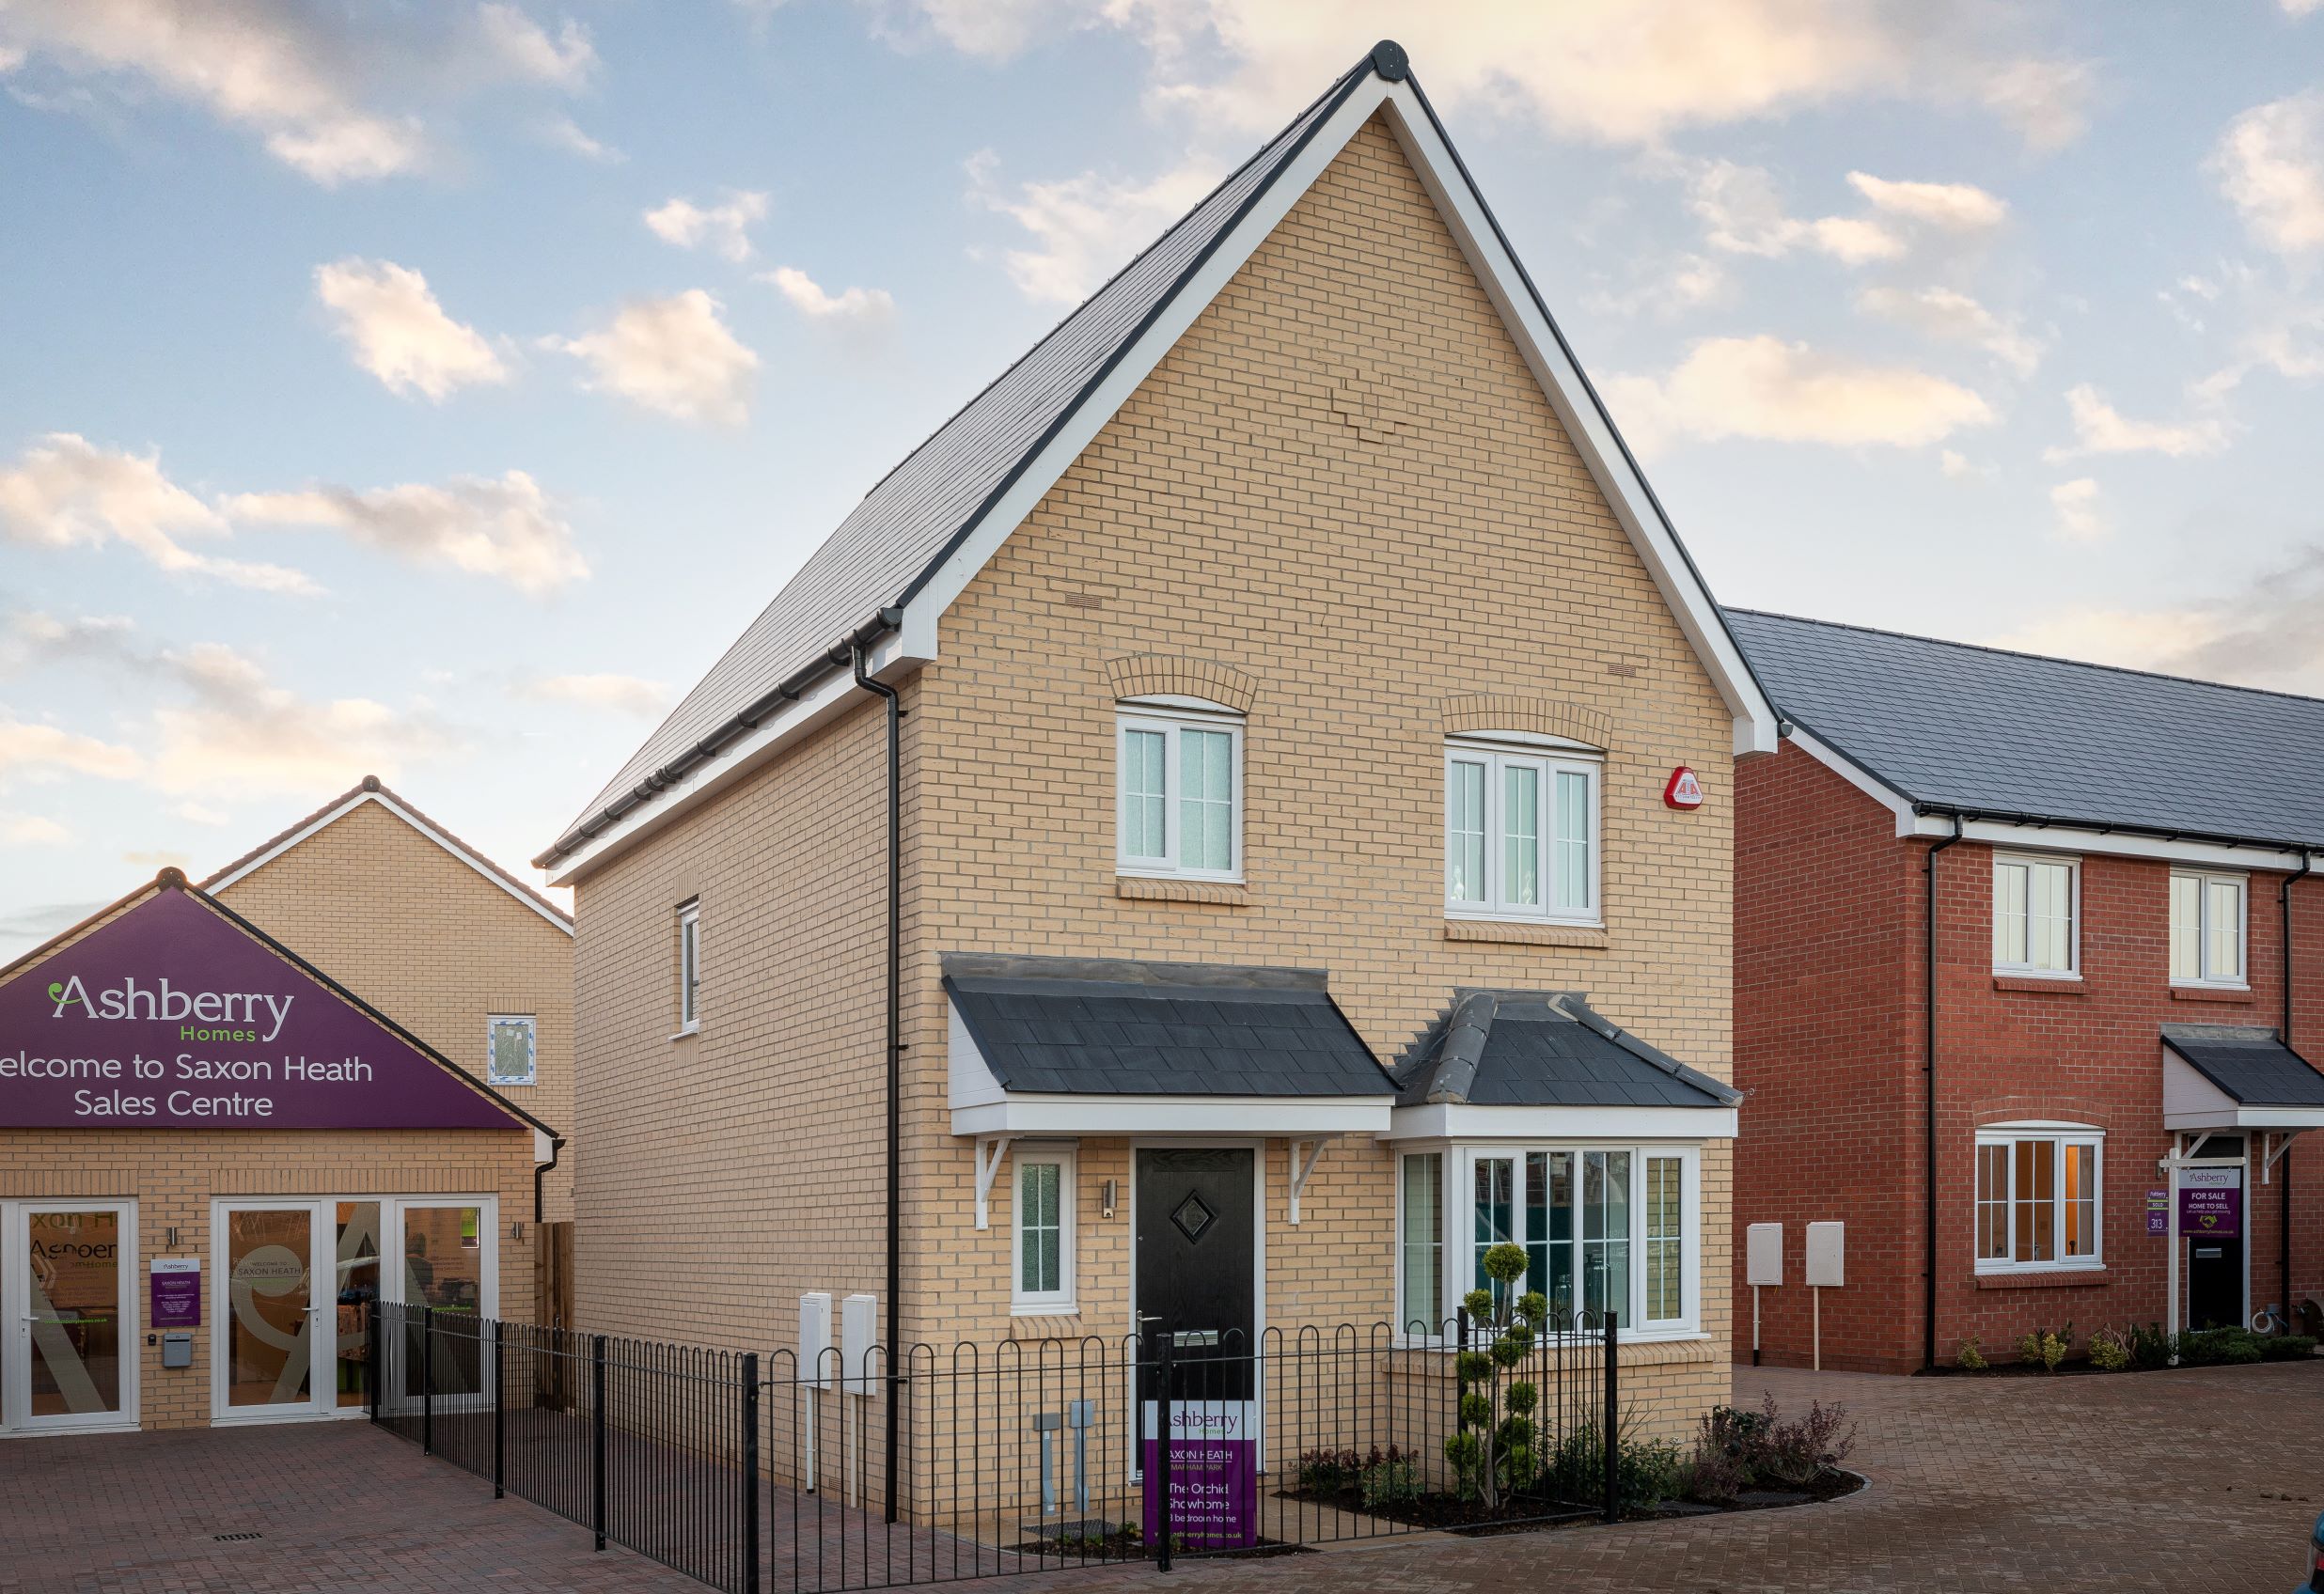 First Residents Move Into Homes at Saxon Heath Development